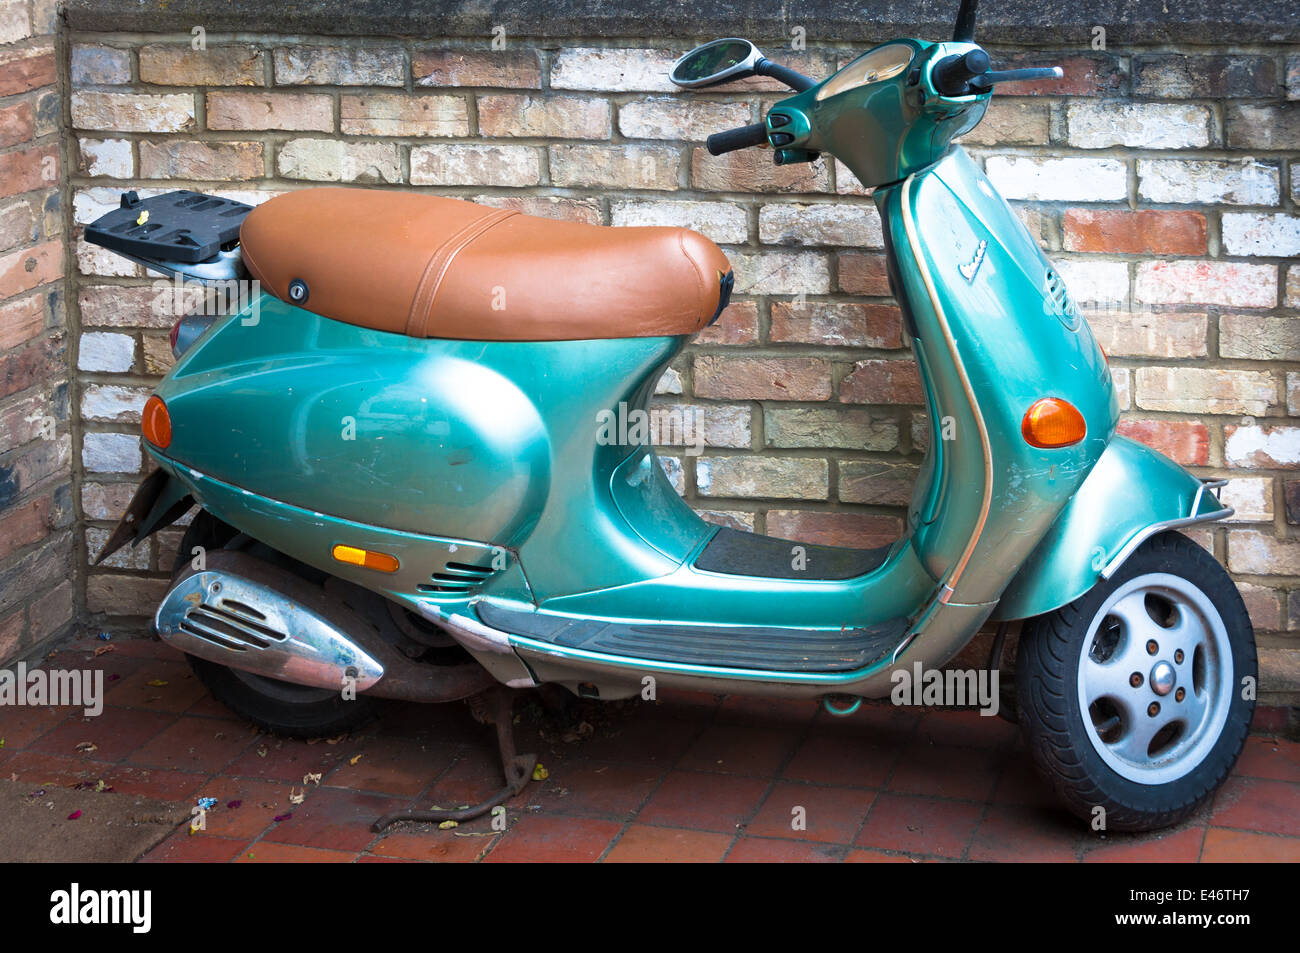 Vintage scooter parked next to a brick wall Stock Photo